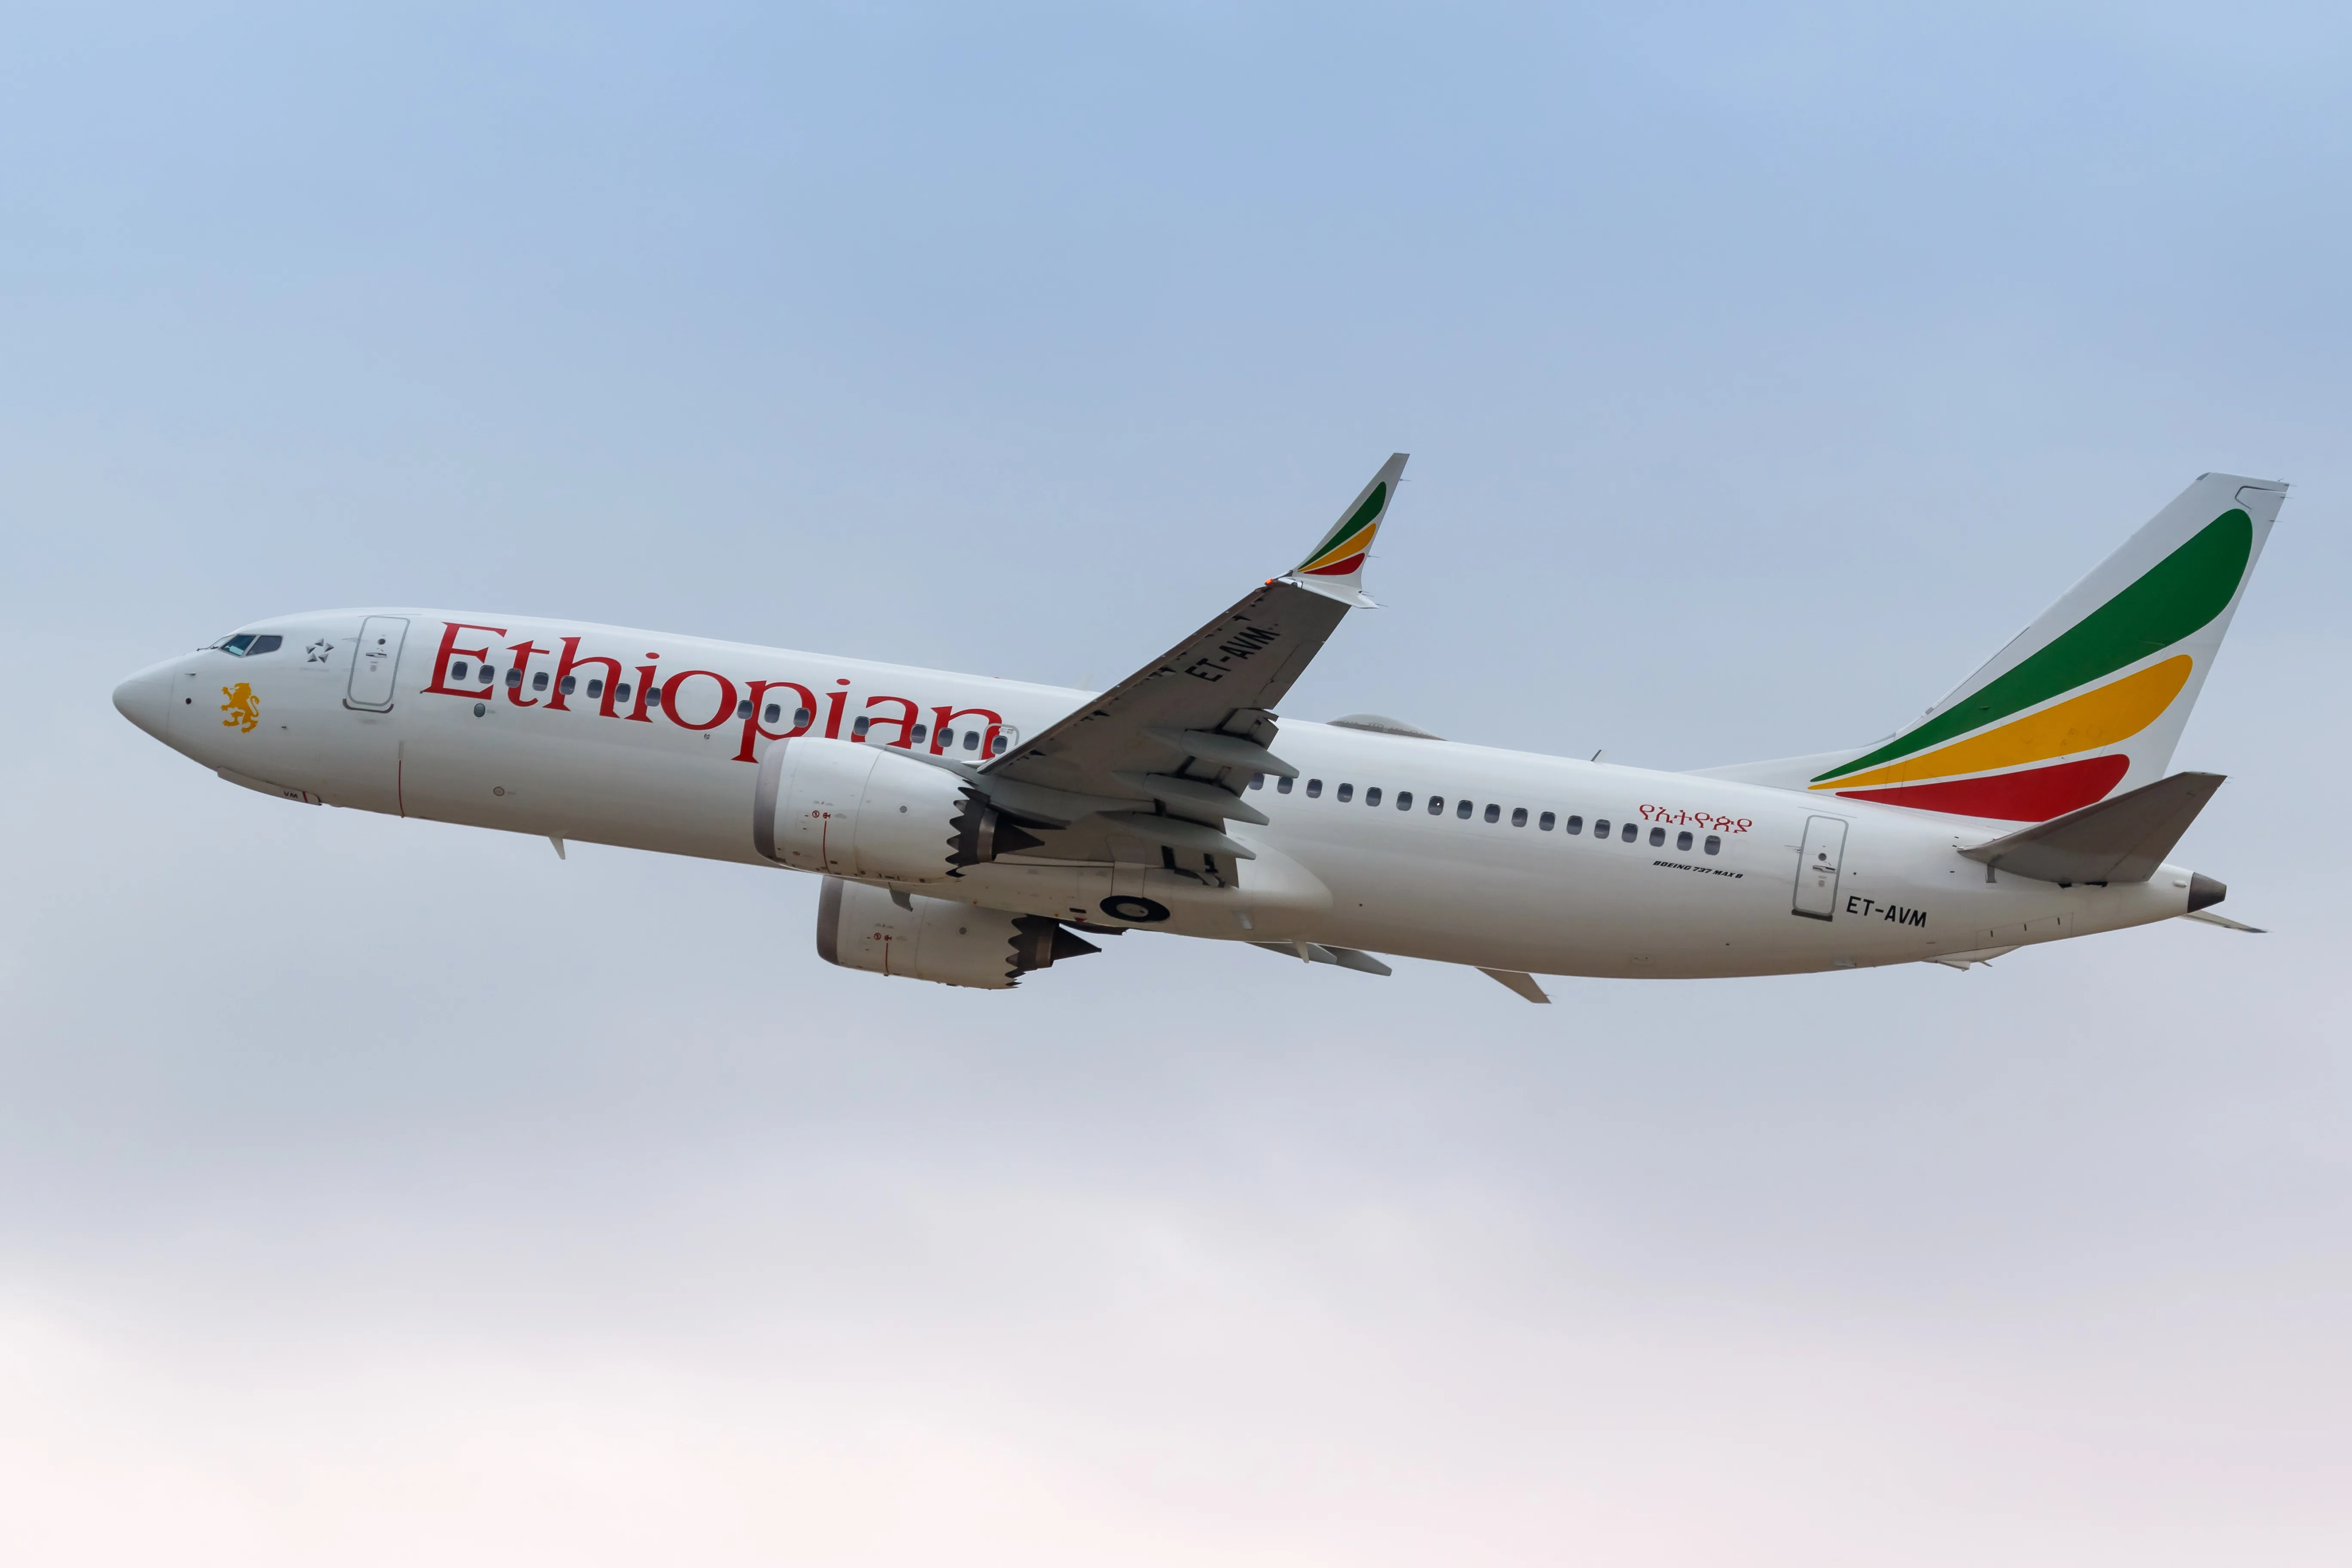 Could Boeing’s safety troubles impact Ethiopian Airlines relationship?